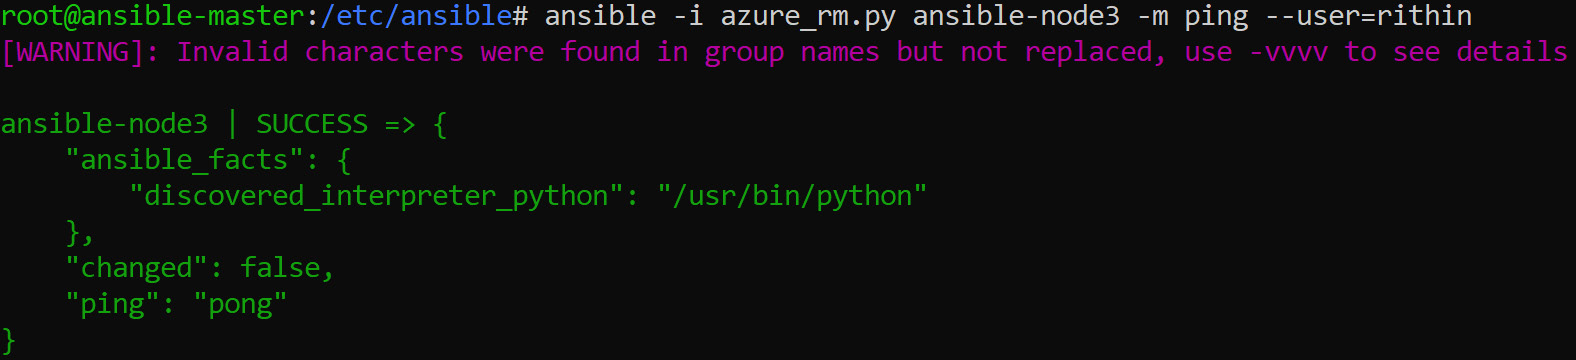 Using the user credentials to ping the ansible-node3 VM